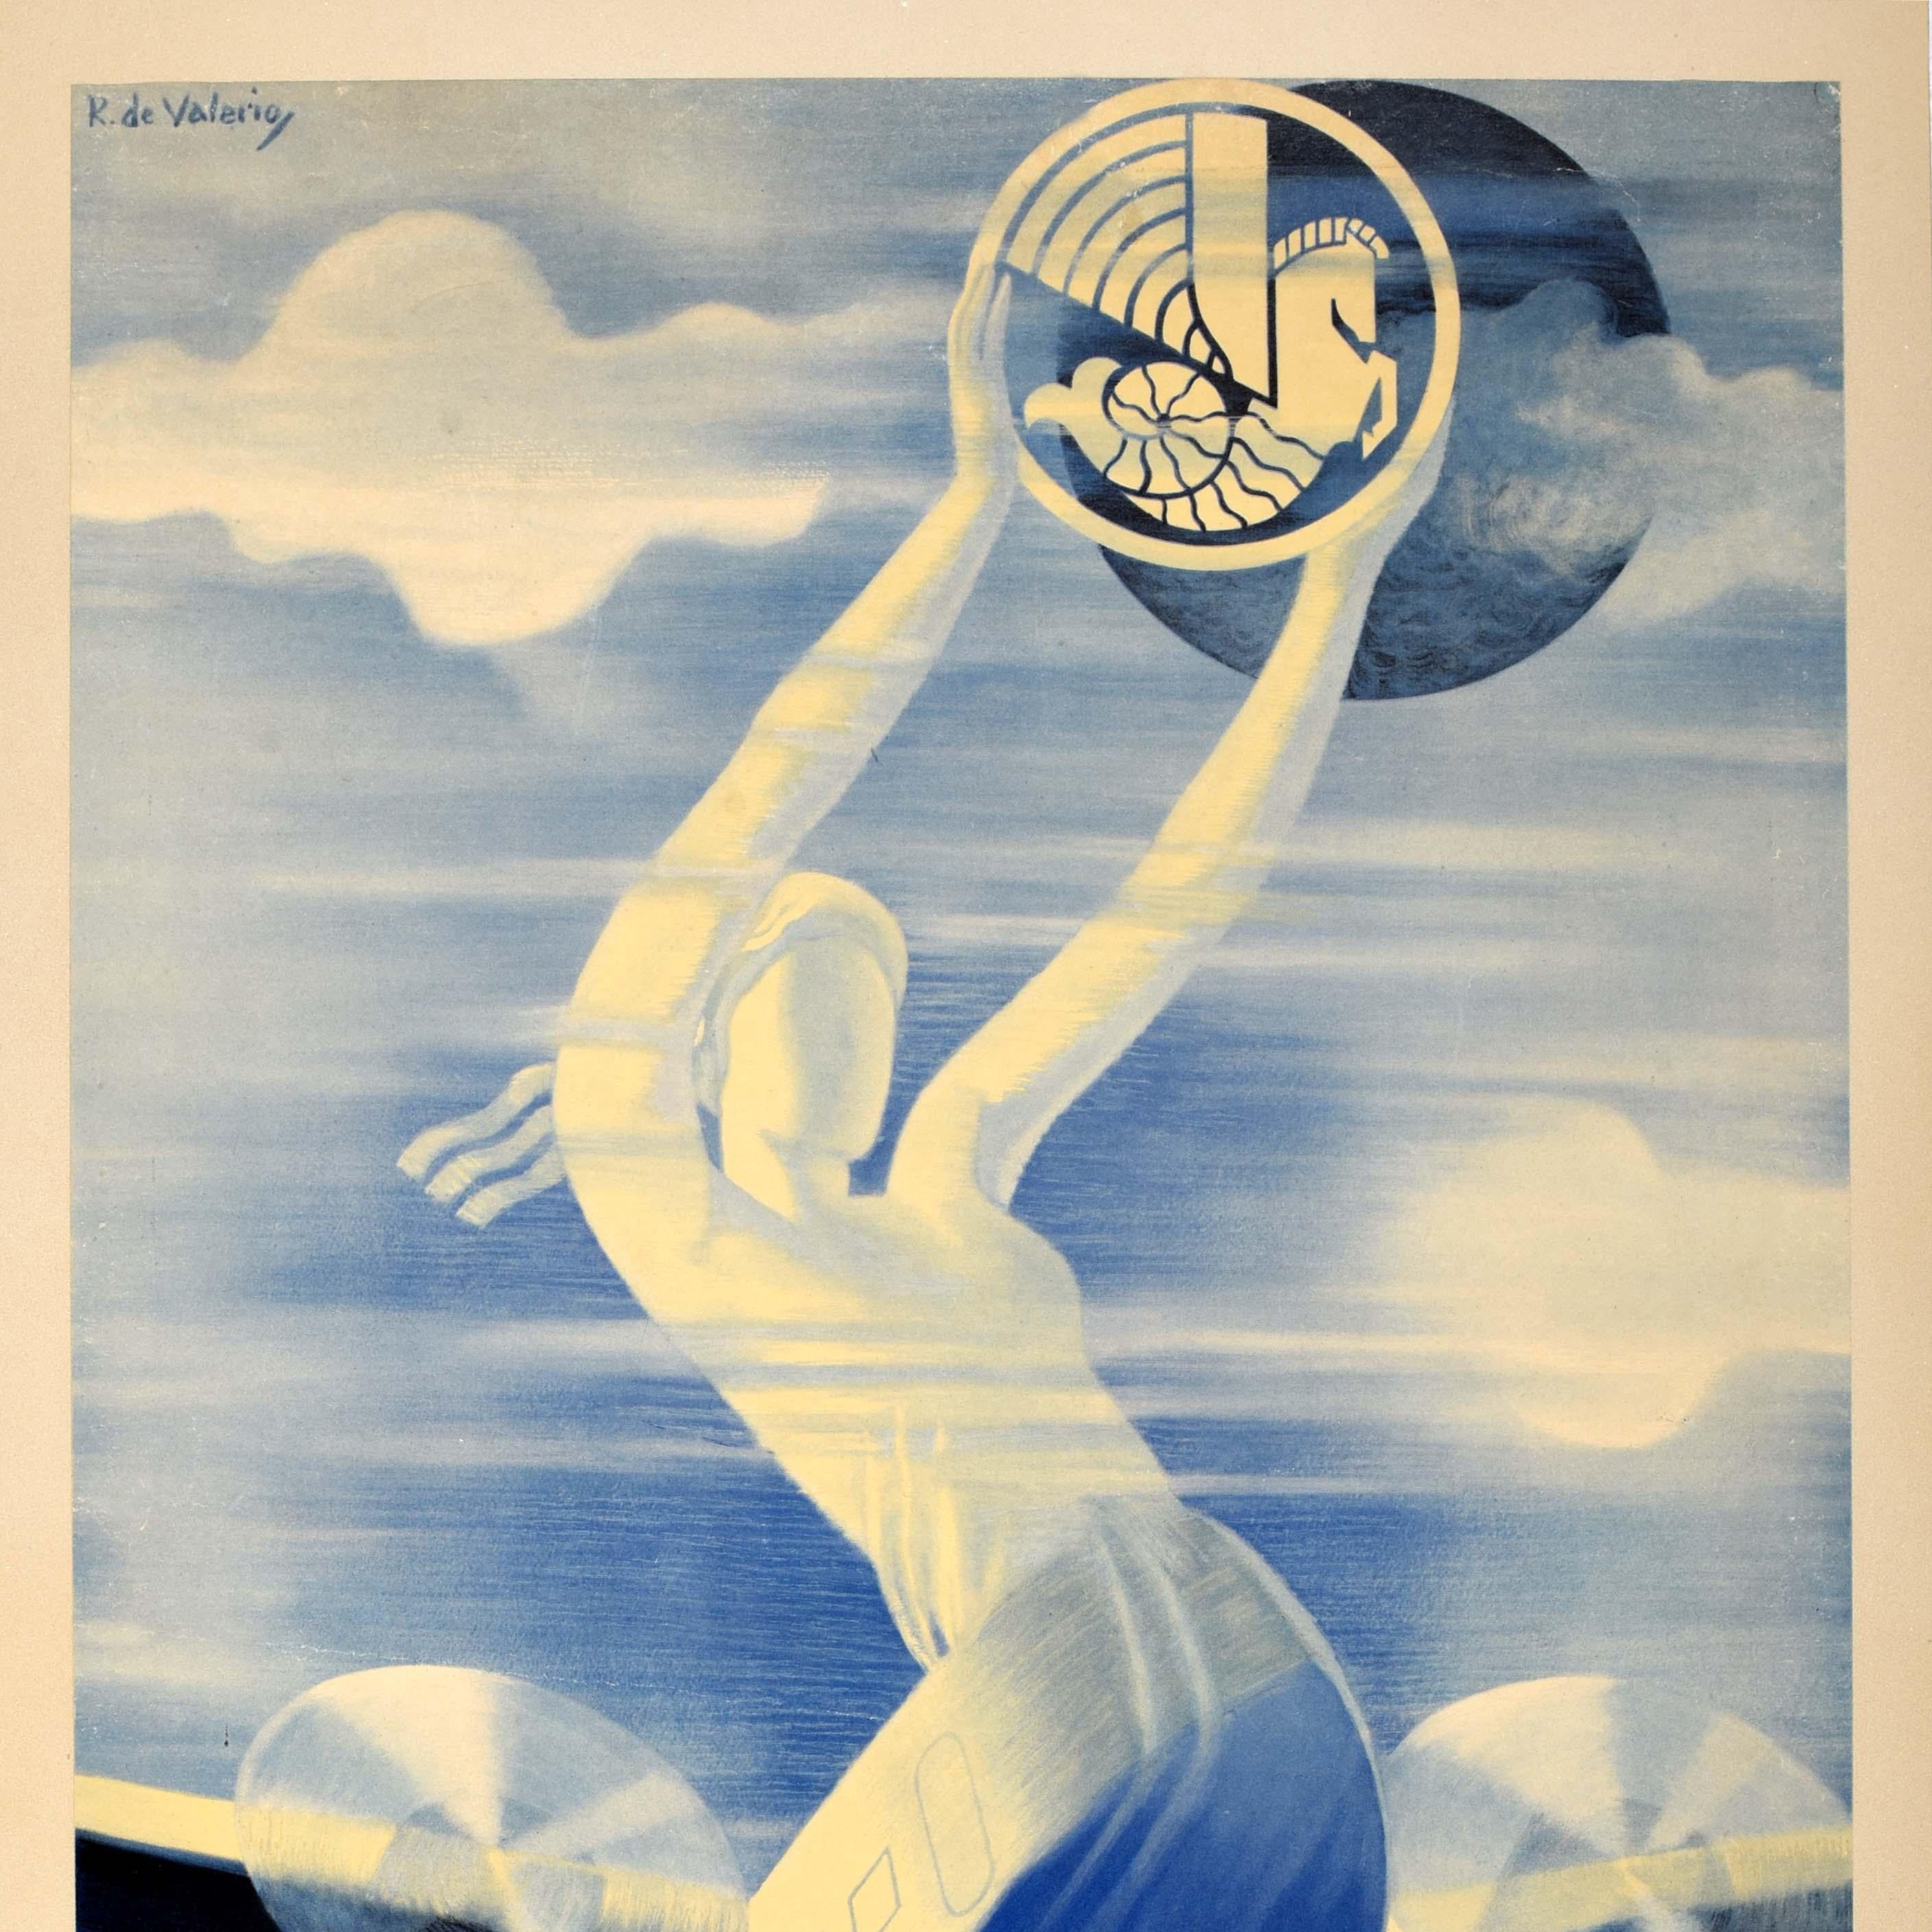 French Original Vintage Travel Poster Air France In All Skies Art Deco Valerio Airways For Sale